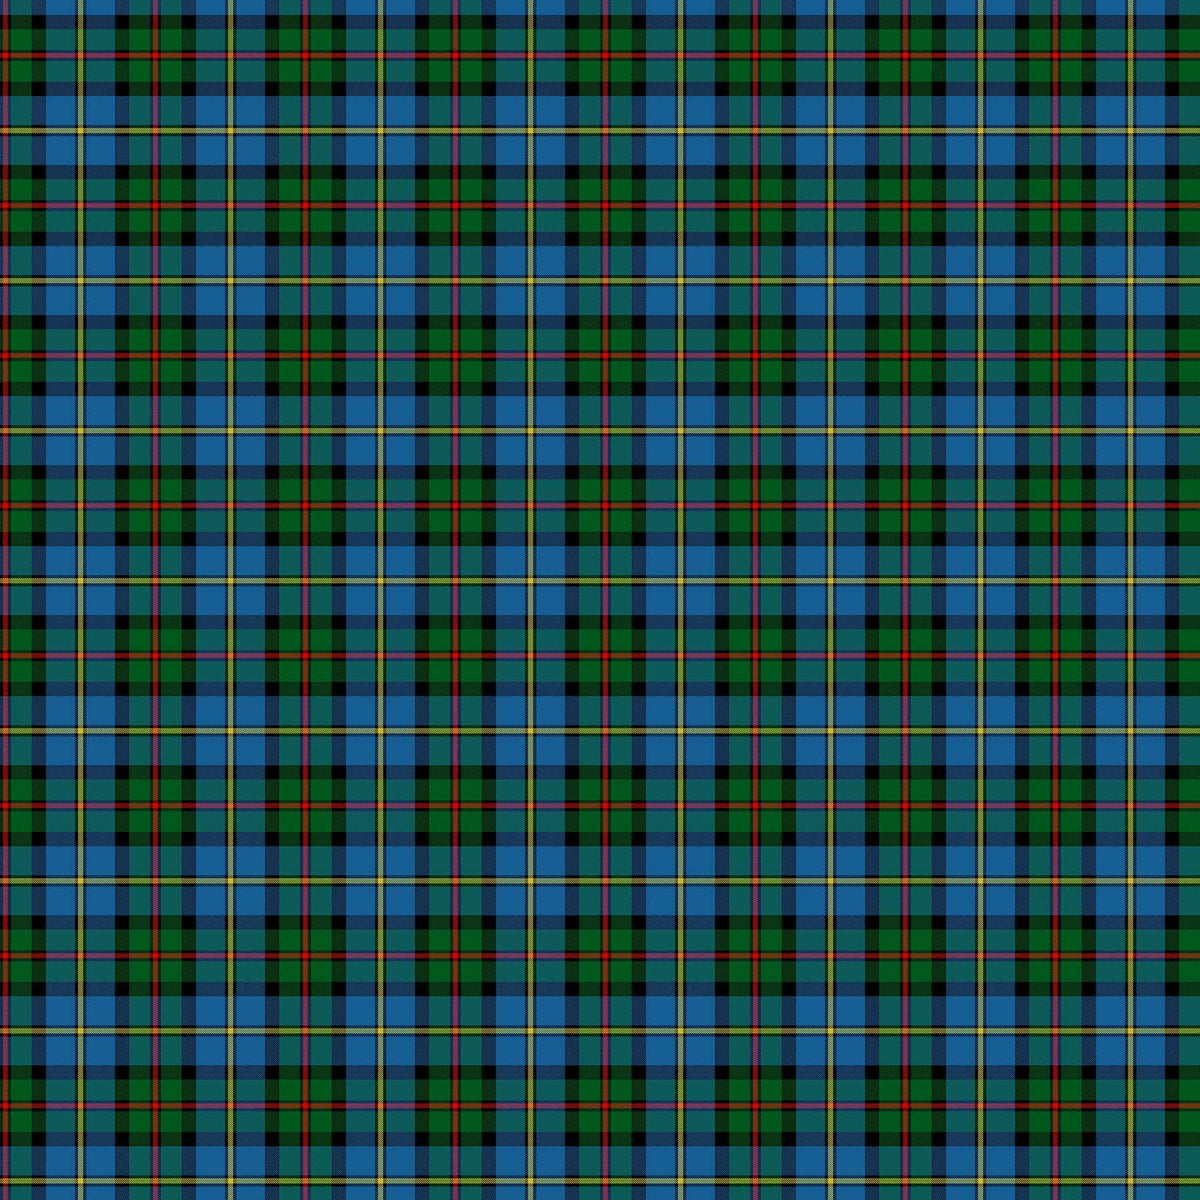 Totally Tartans Brushed Cotton Quilt Fabric - Mackenzie in Blue/Multi - W24506-44